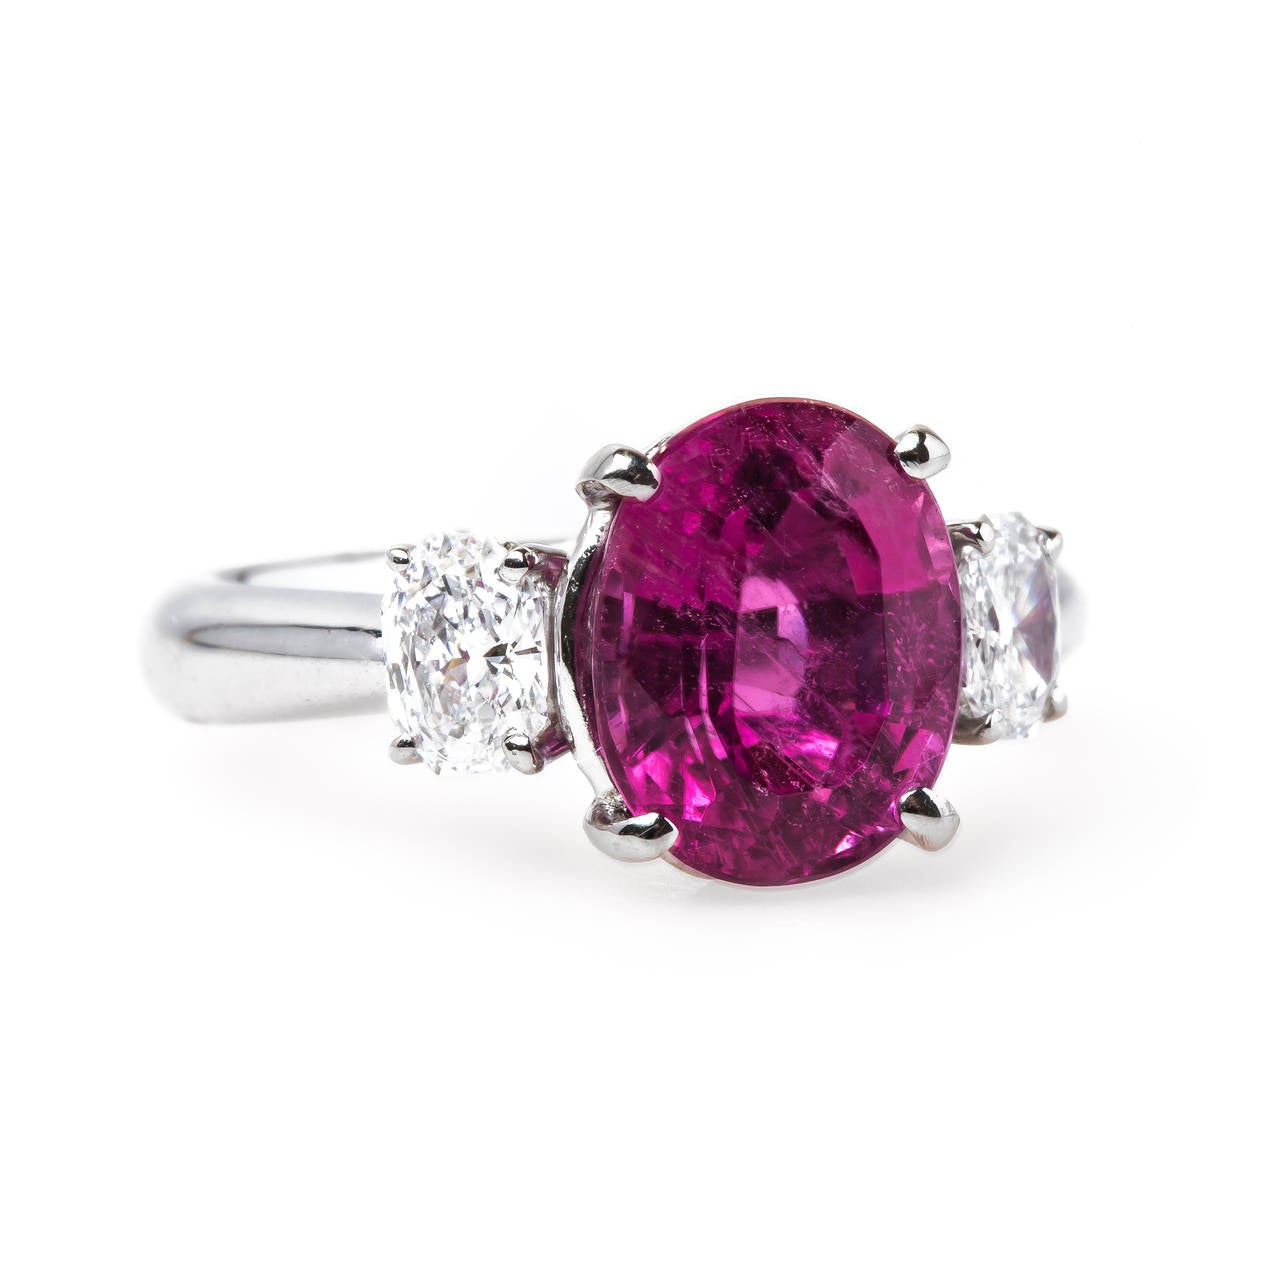 Bixby Bridge is a bright and beautiful modern (circa 1990) platinum ring centering a four-prong set neon Oval Cut natural pink tourmaline with an exact weight of 3.00ct. The stunning pink stone is flanked by two uniquely shaped Oval Octagonal Cut